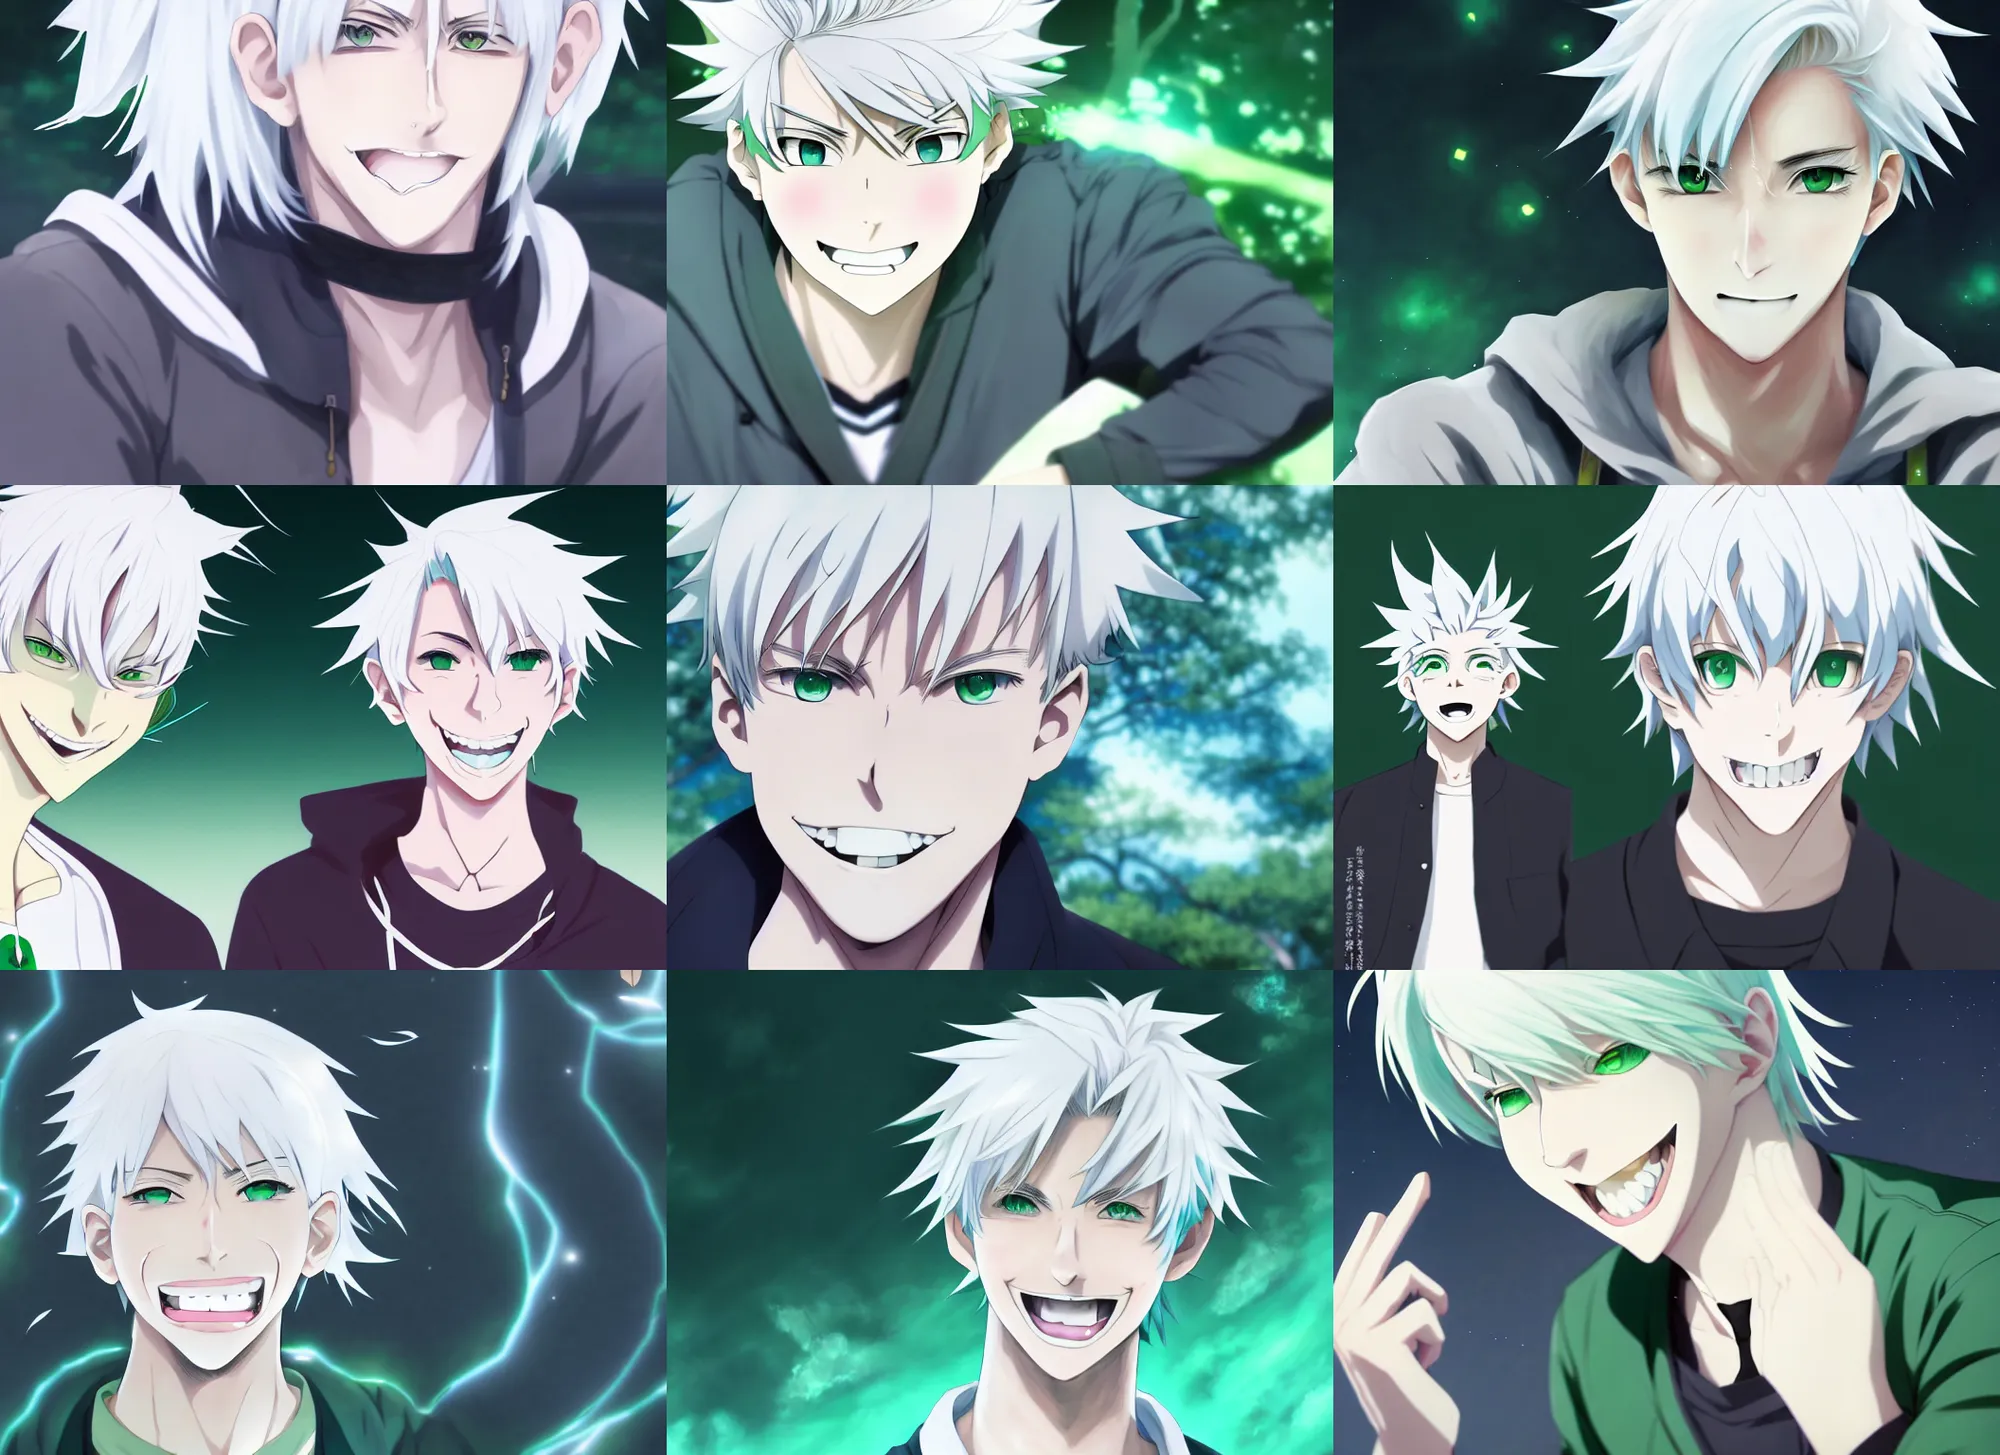 anime boy with green hair and blue eyes